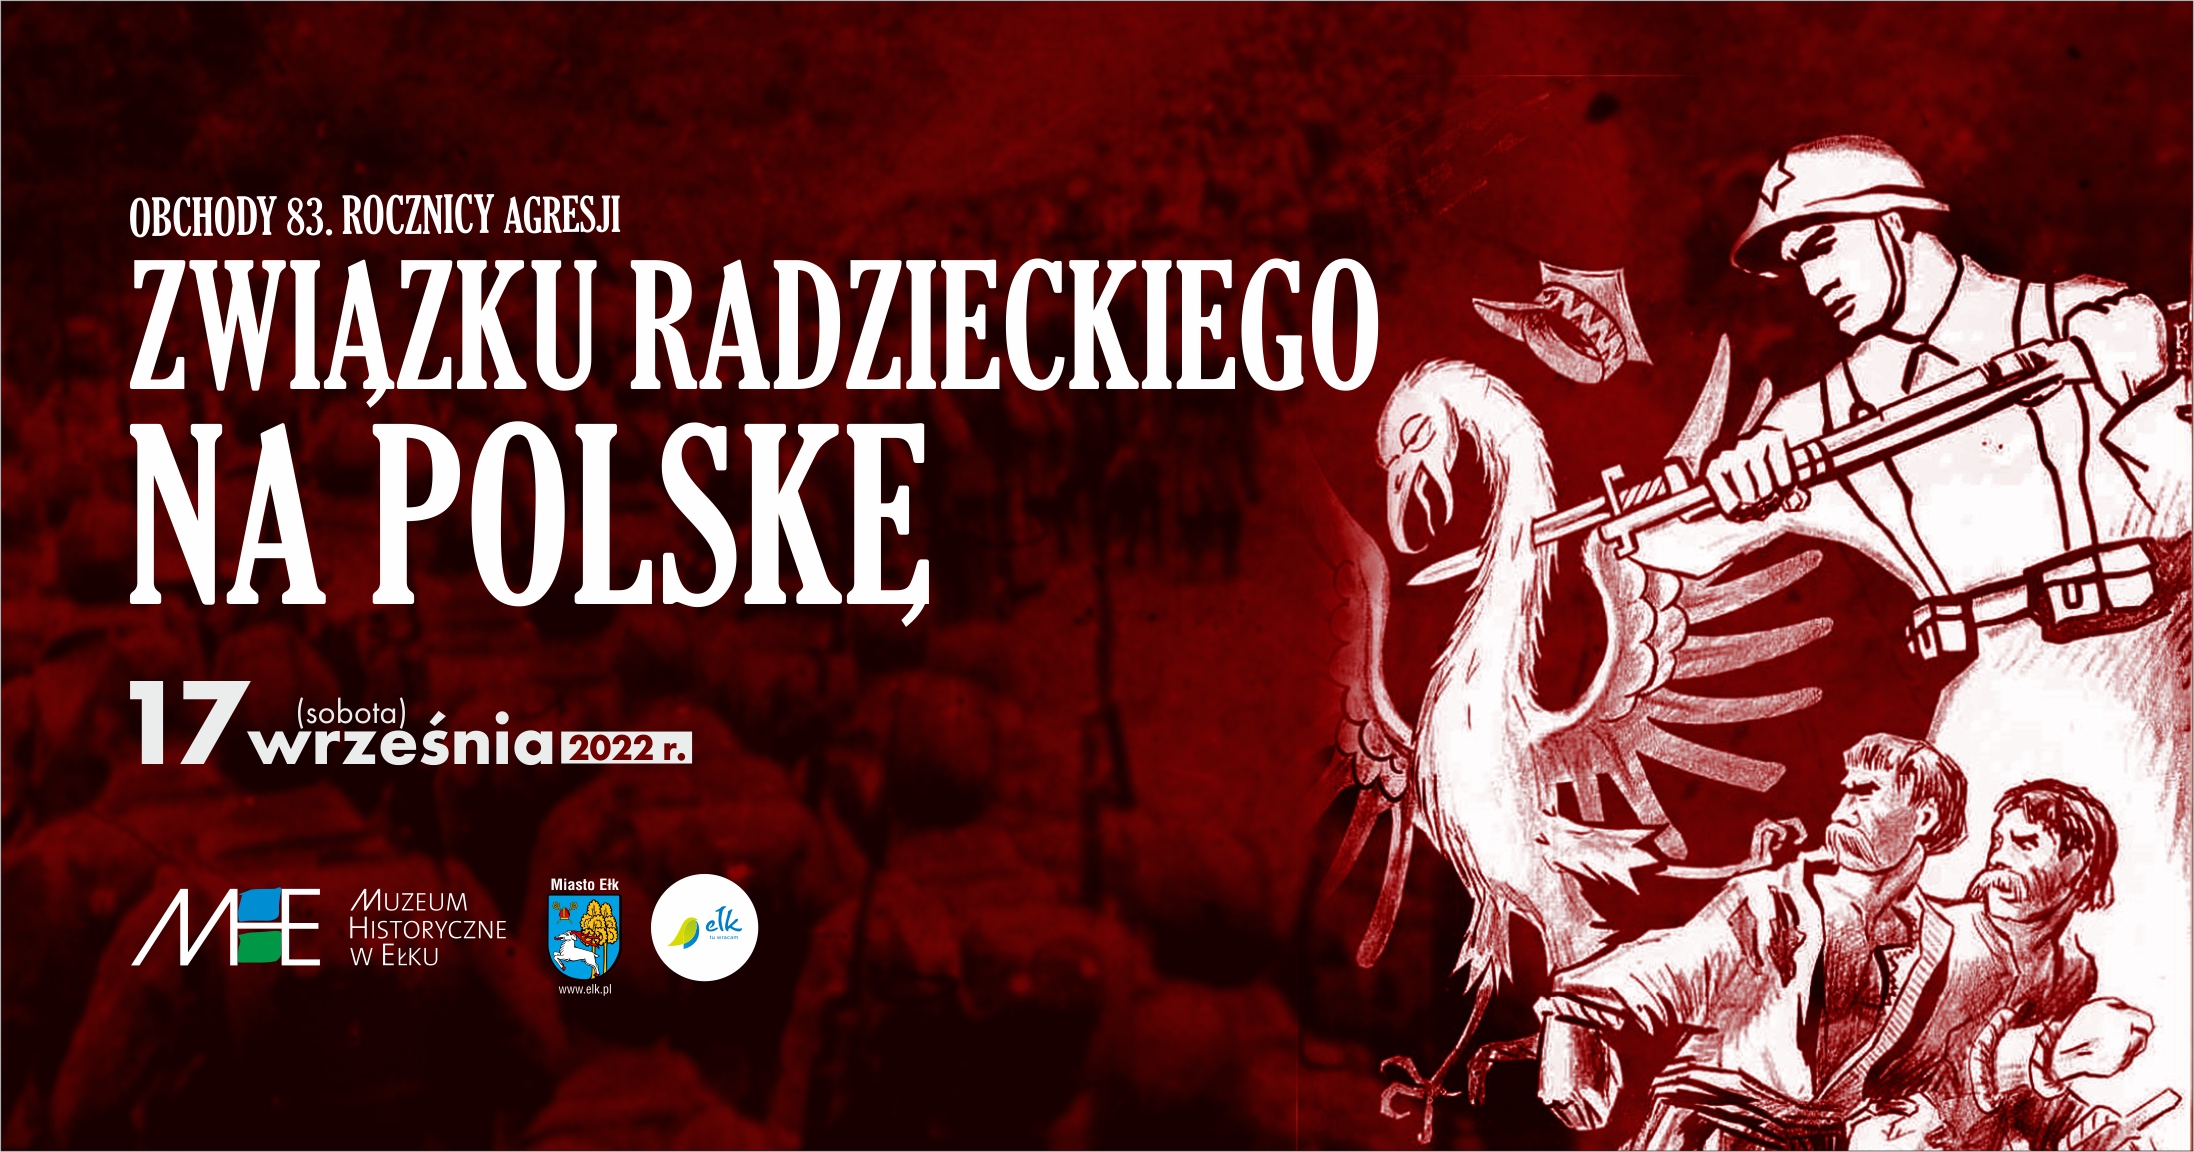 83rd anniversary of the USSR's aggression against Poland